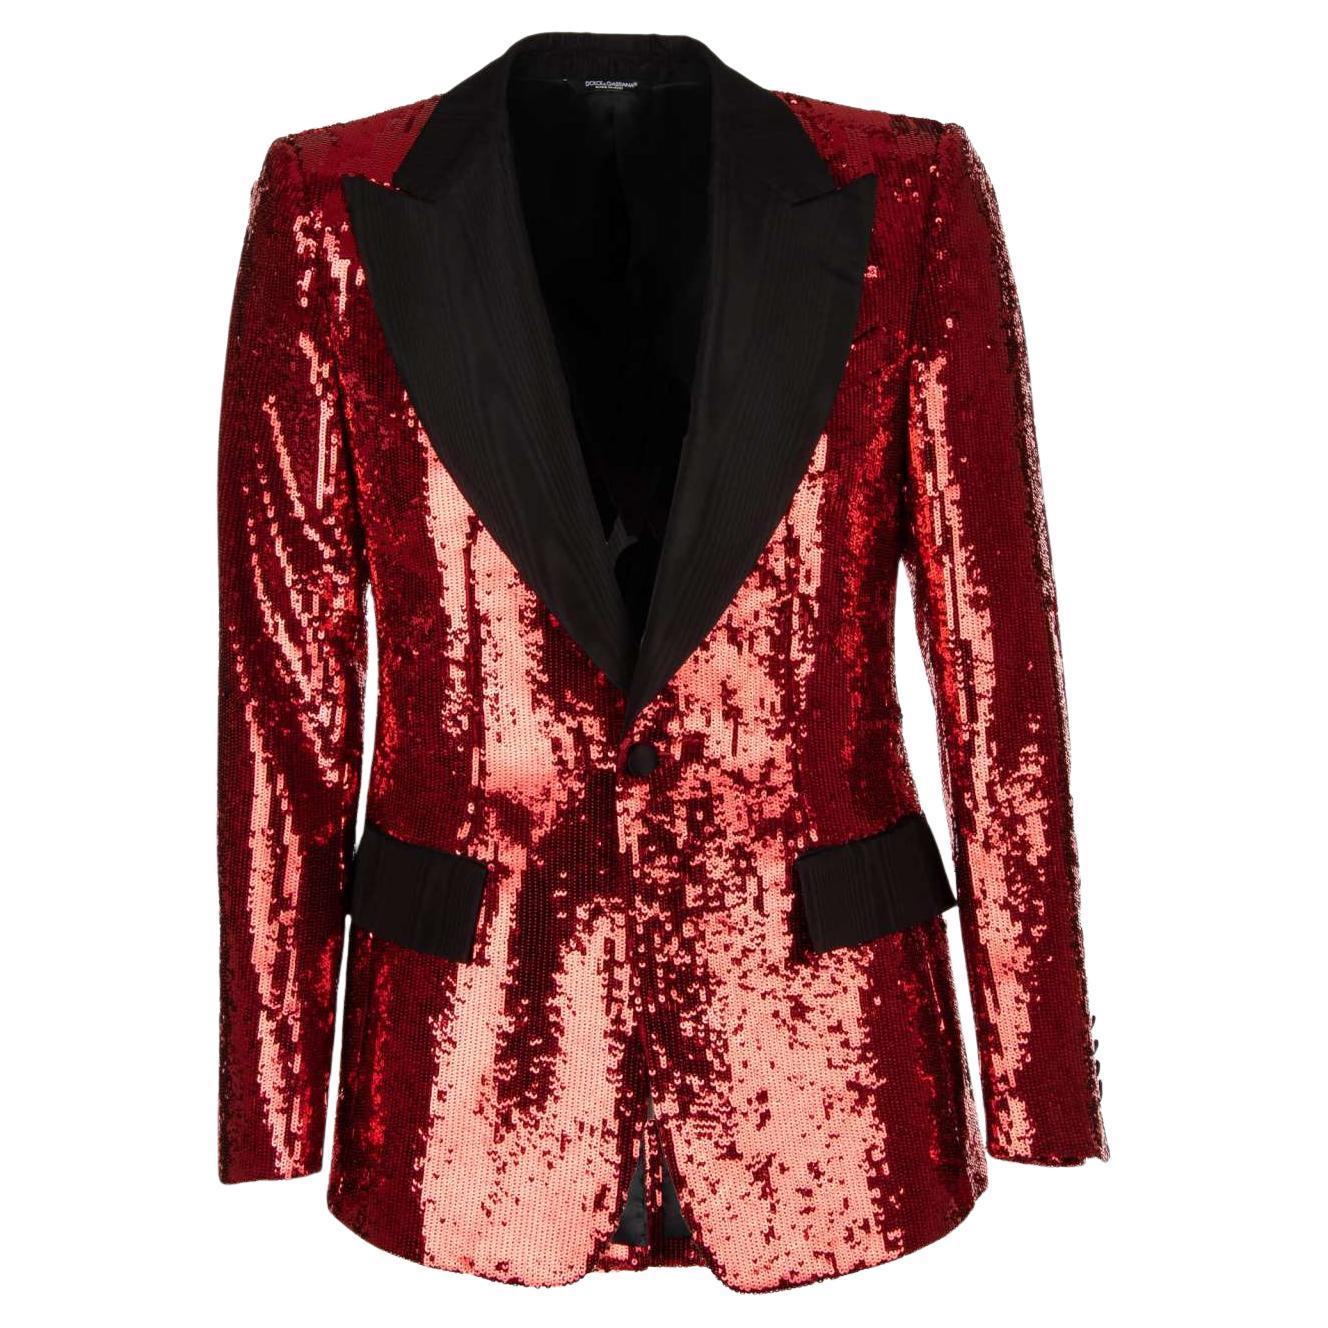 Dolce & Gabbana - Sequined Tuxedo Blazer with Moire Lapel Red Black 48 For Sale